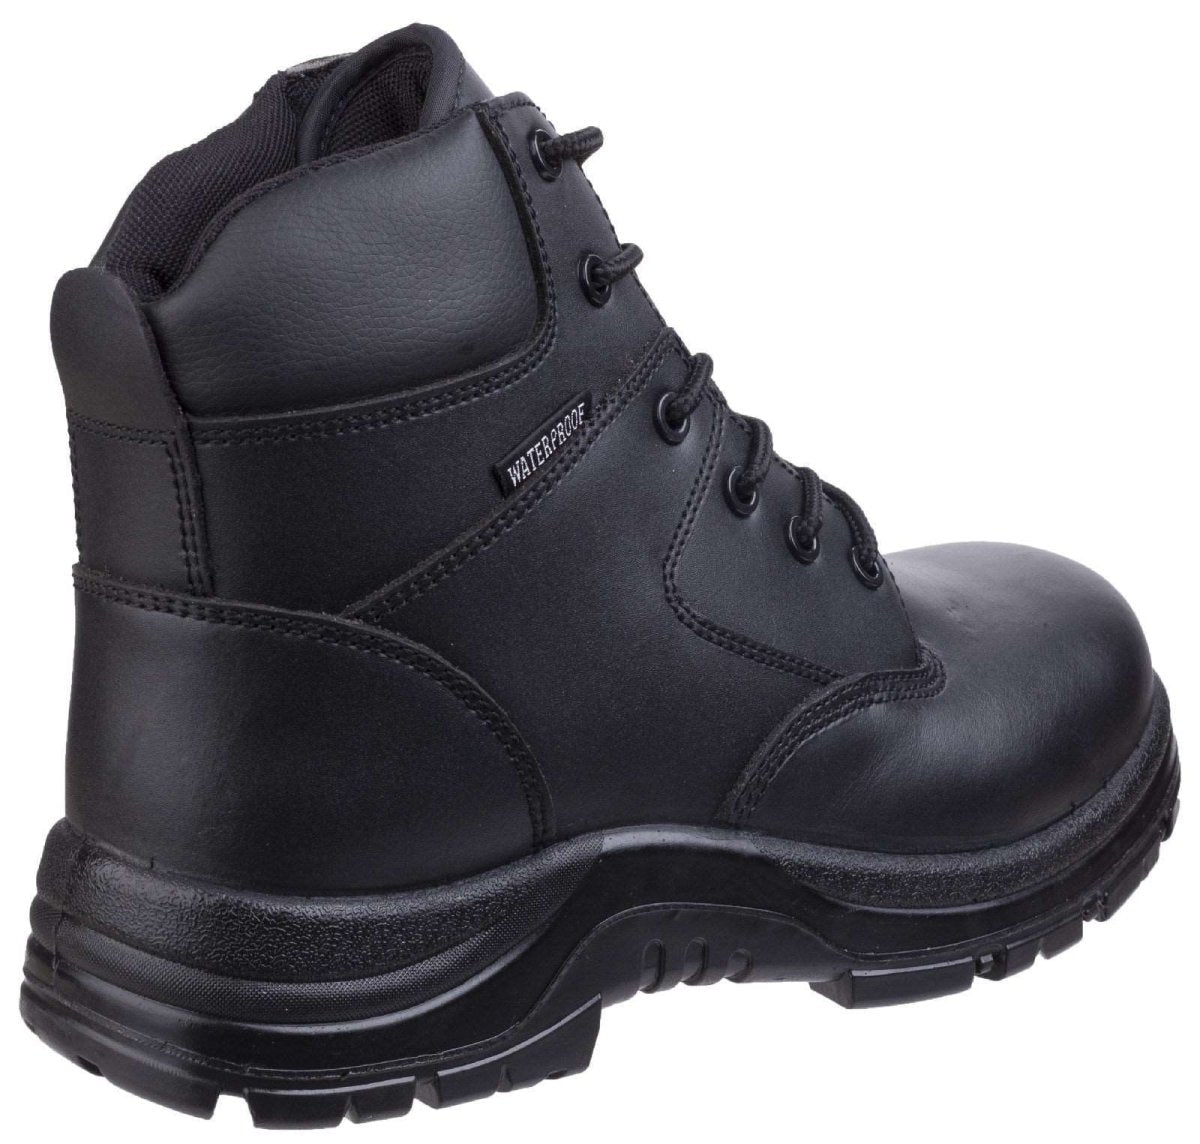 Amblers FS006C Waterproof Safety Boots - Shoe Store Direct